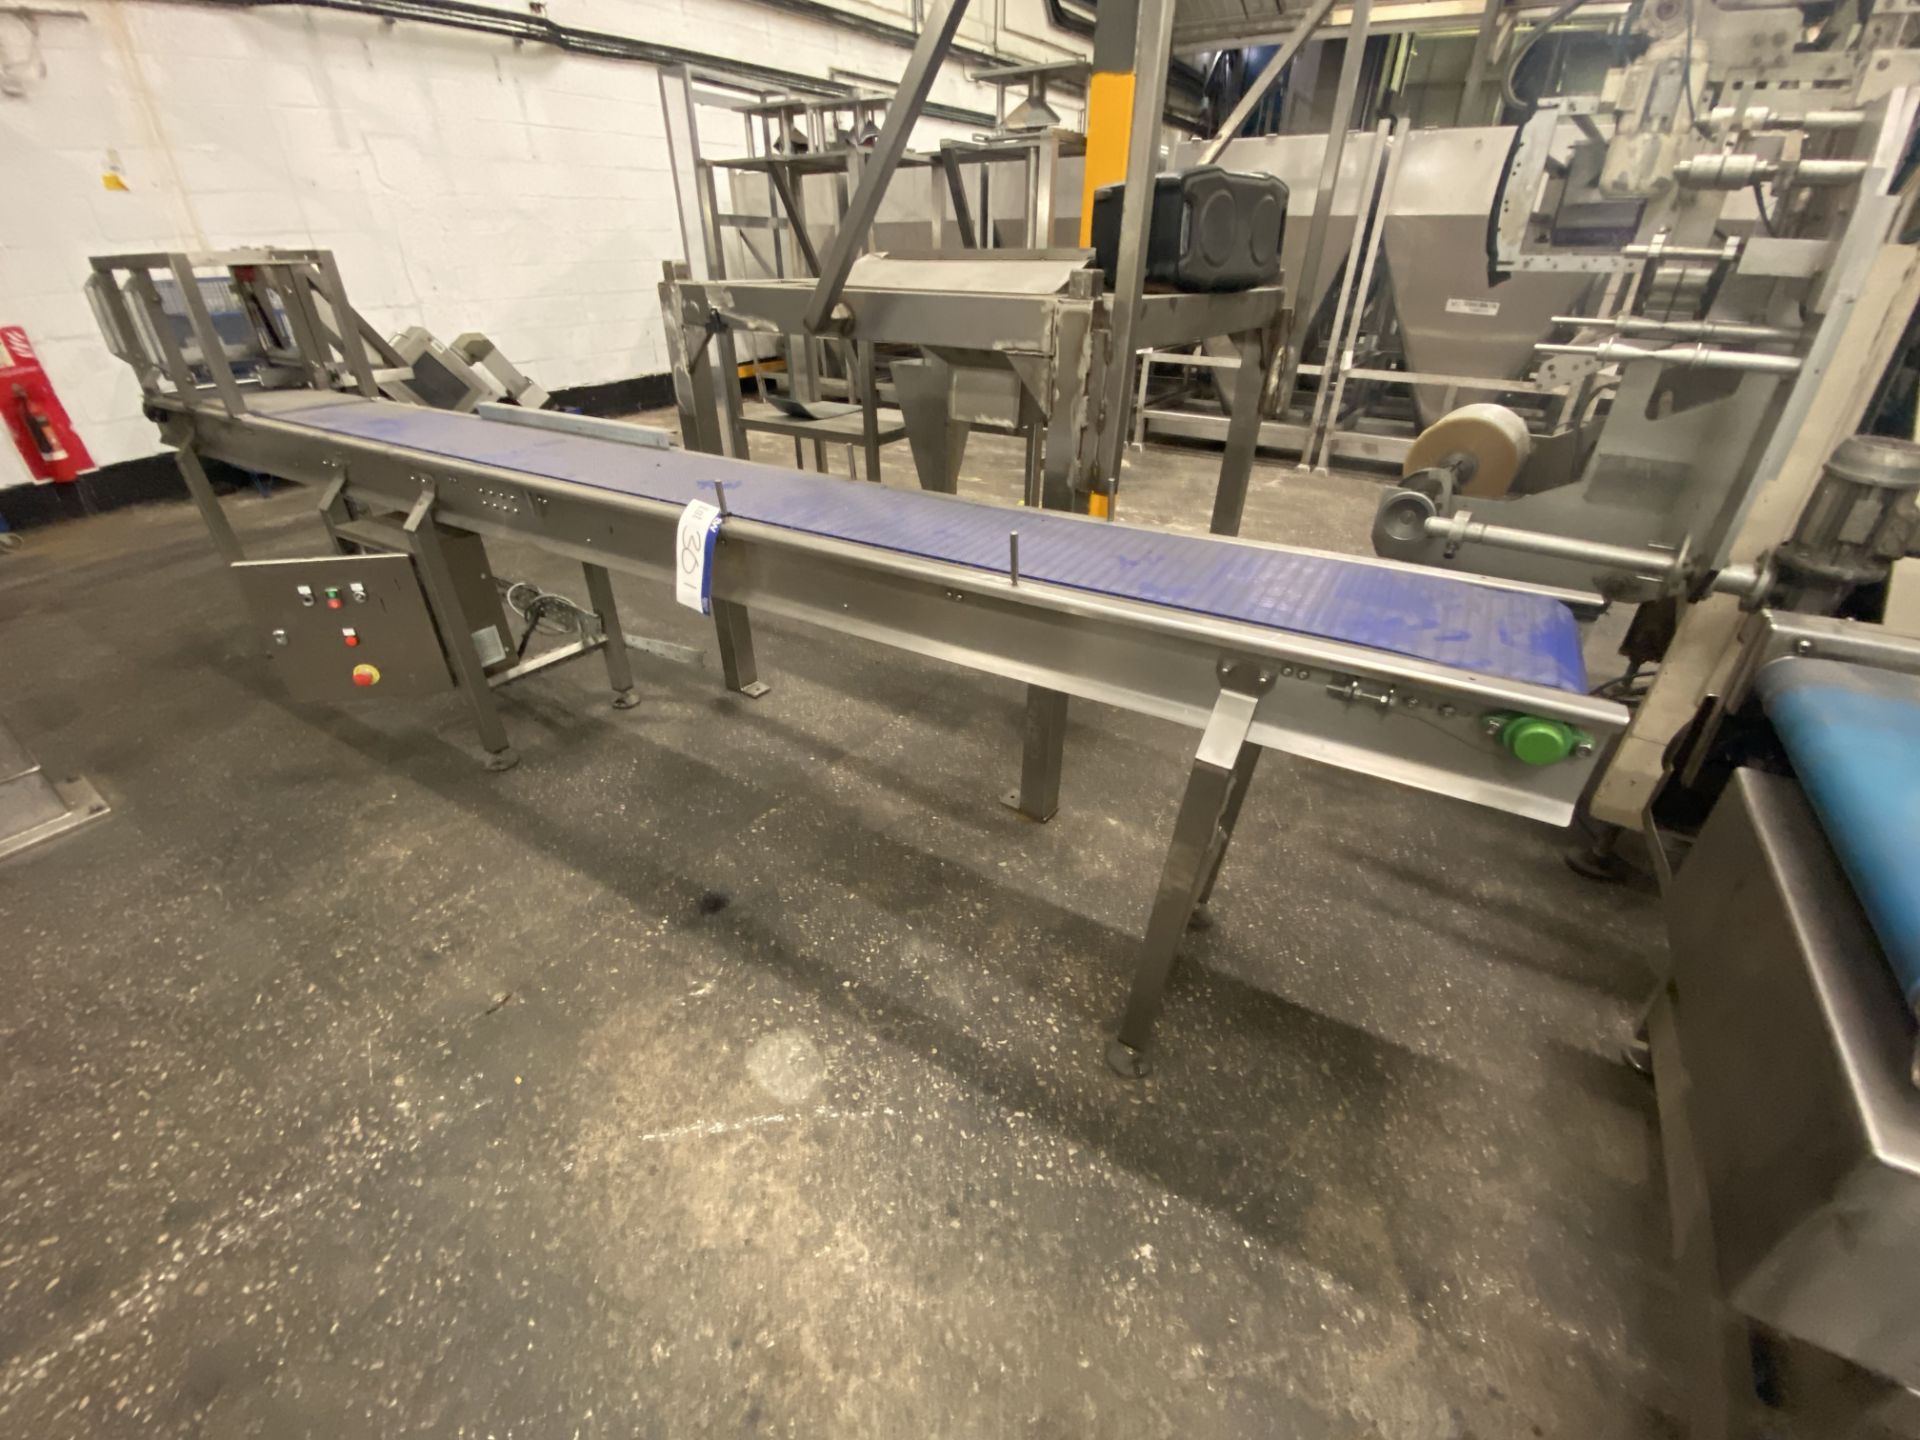 Stainless Steel Framed Plastic Belt Conveyor, approx. 4.2m centres long x 300mm wide on belt, with - Bild 6 aus 6